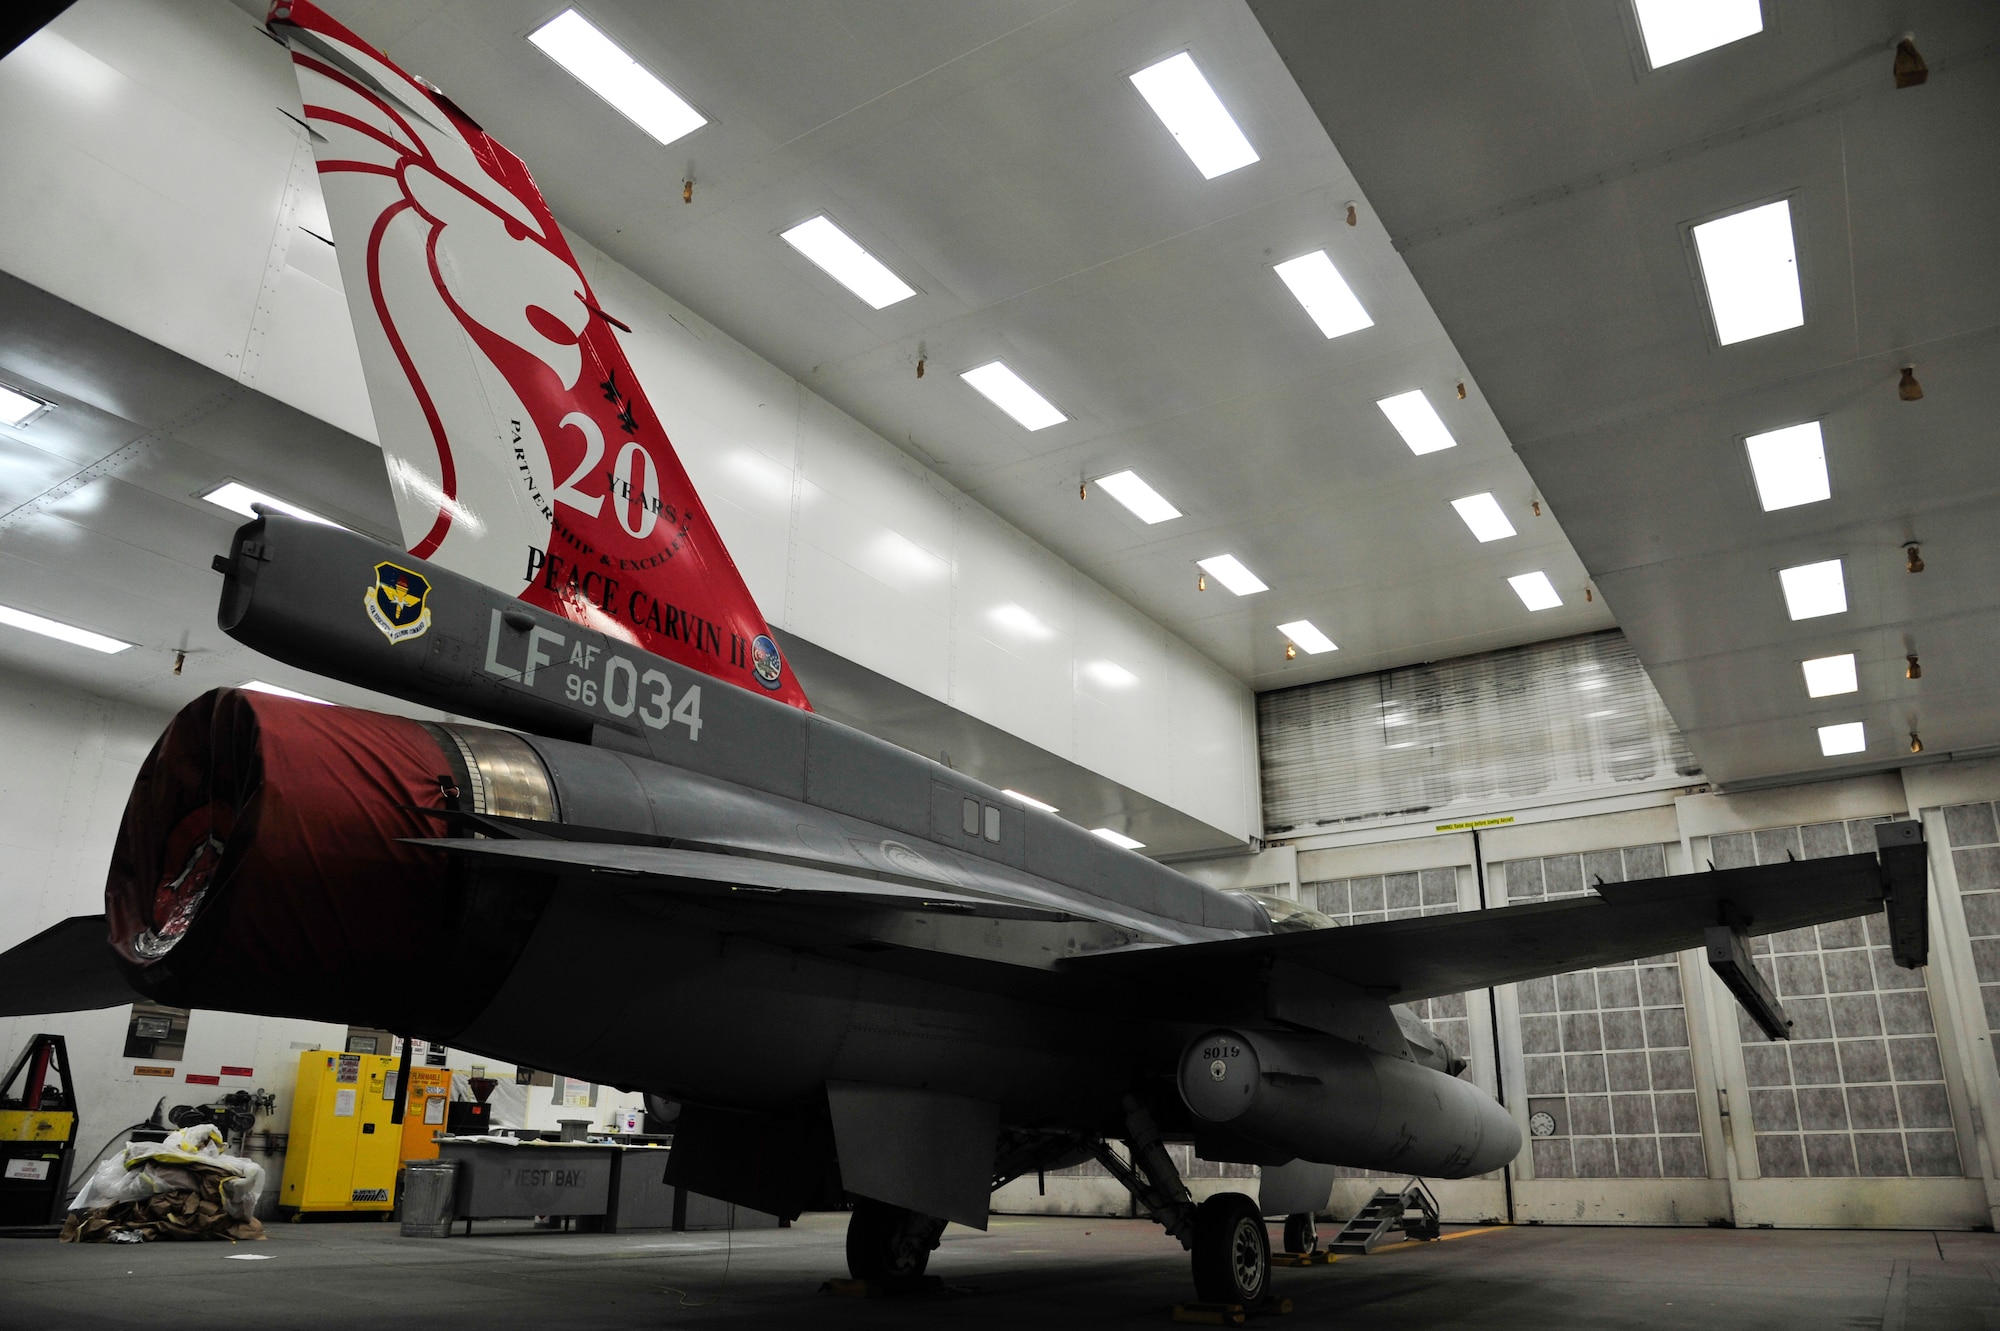 The Republic of Singapore’s F-16 fighter jet tail painting was completed Oct. 24 in the corrosion building paint booth on Luke Air Force Base. Personnel from the 56th Equipment Maintenance Squadron corrosion control section spent several days working on this one-of-a-kind project. (U.S. Air Force photo/Senior Airman Grace Lee)